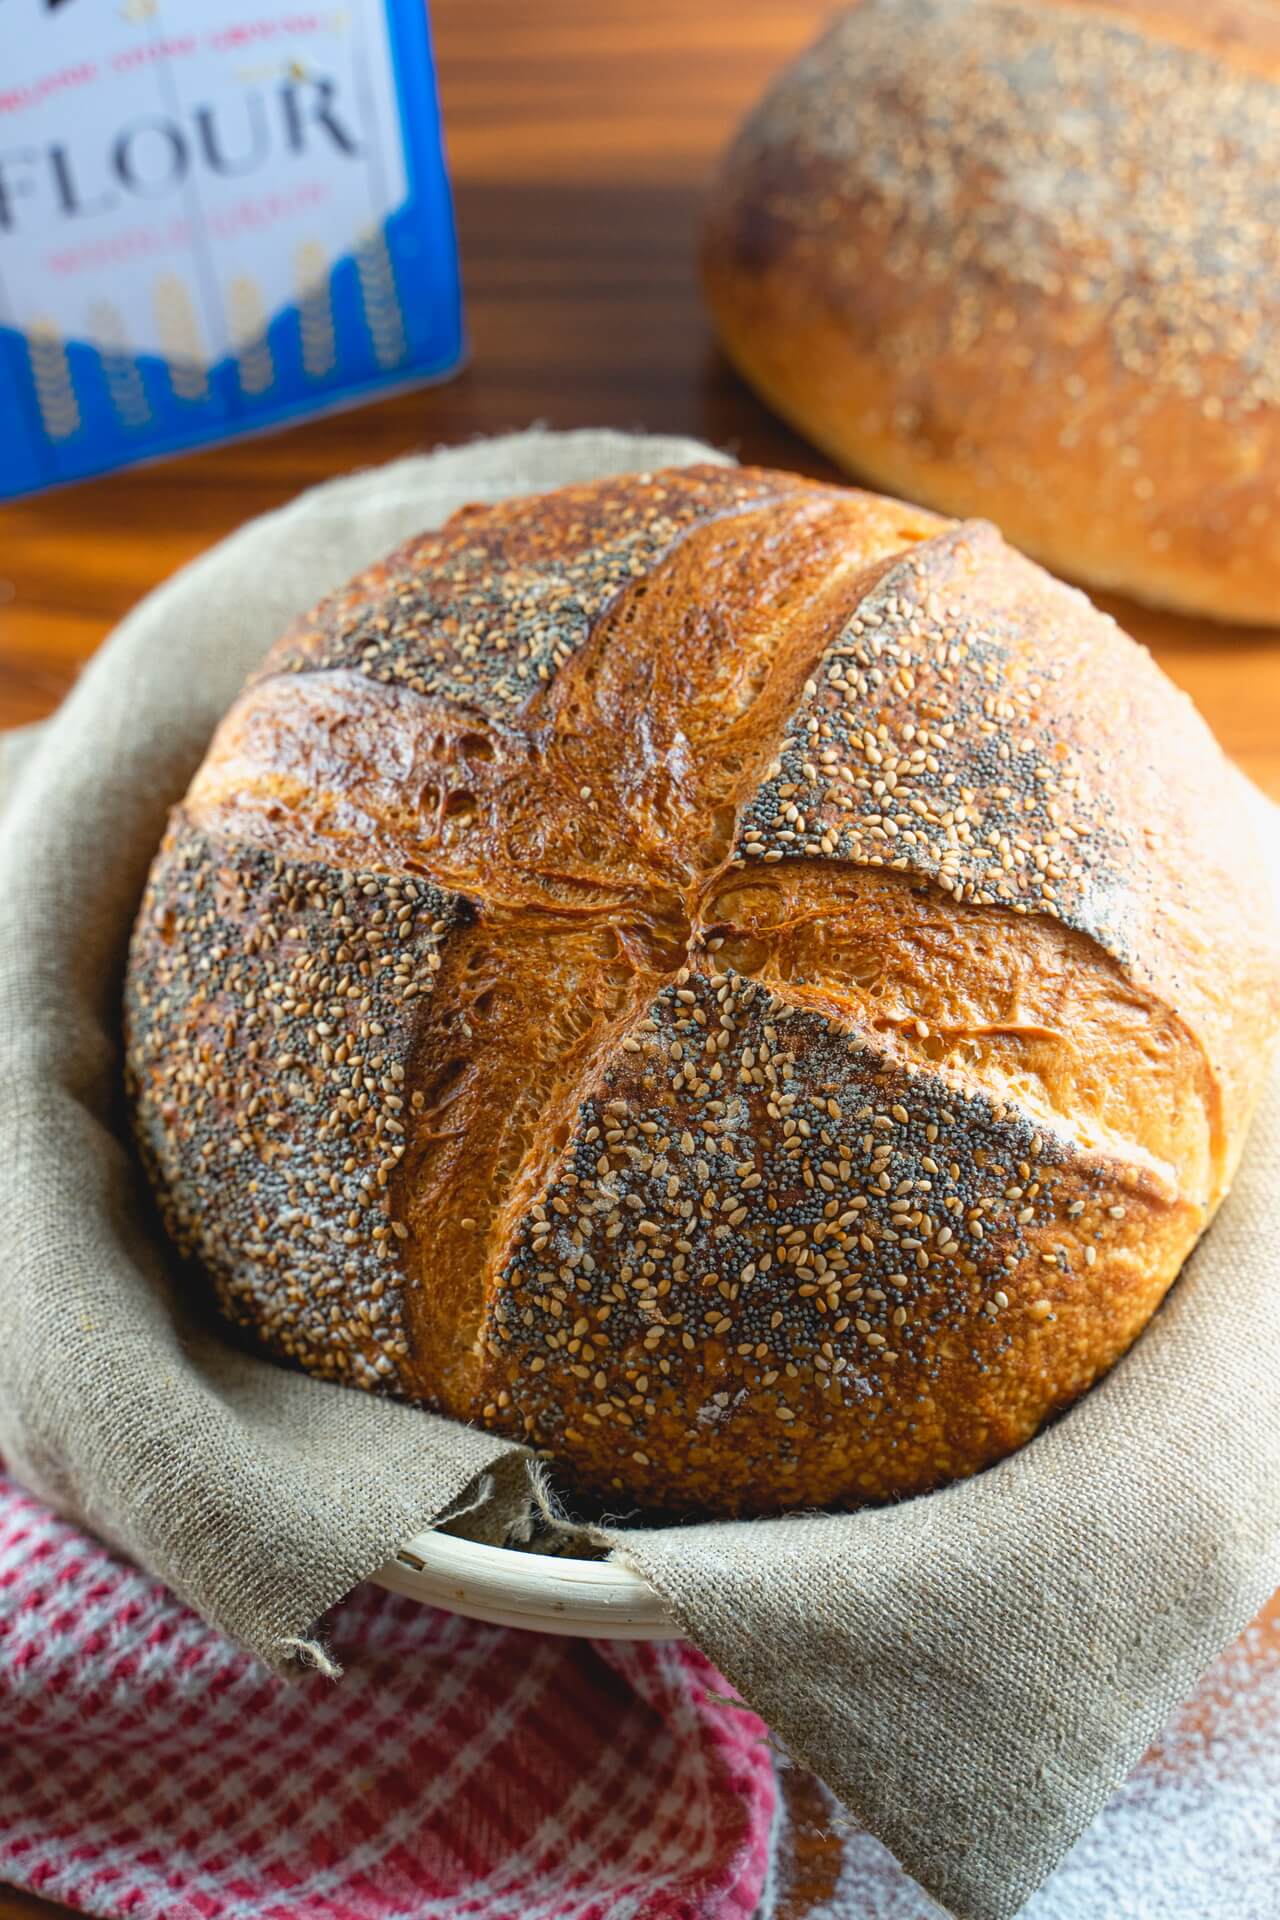 Sourdough Bread With Sesame And Poppy Seeds Crust Vertical